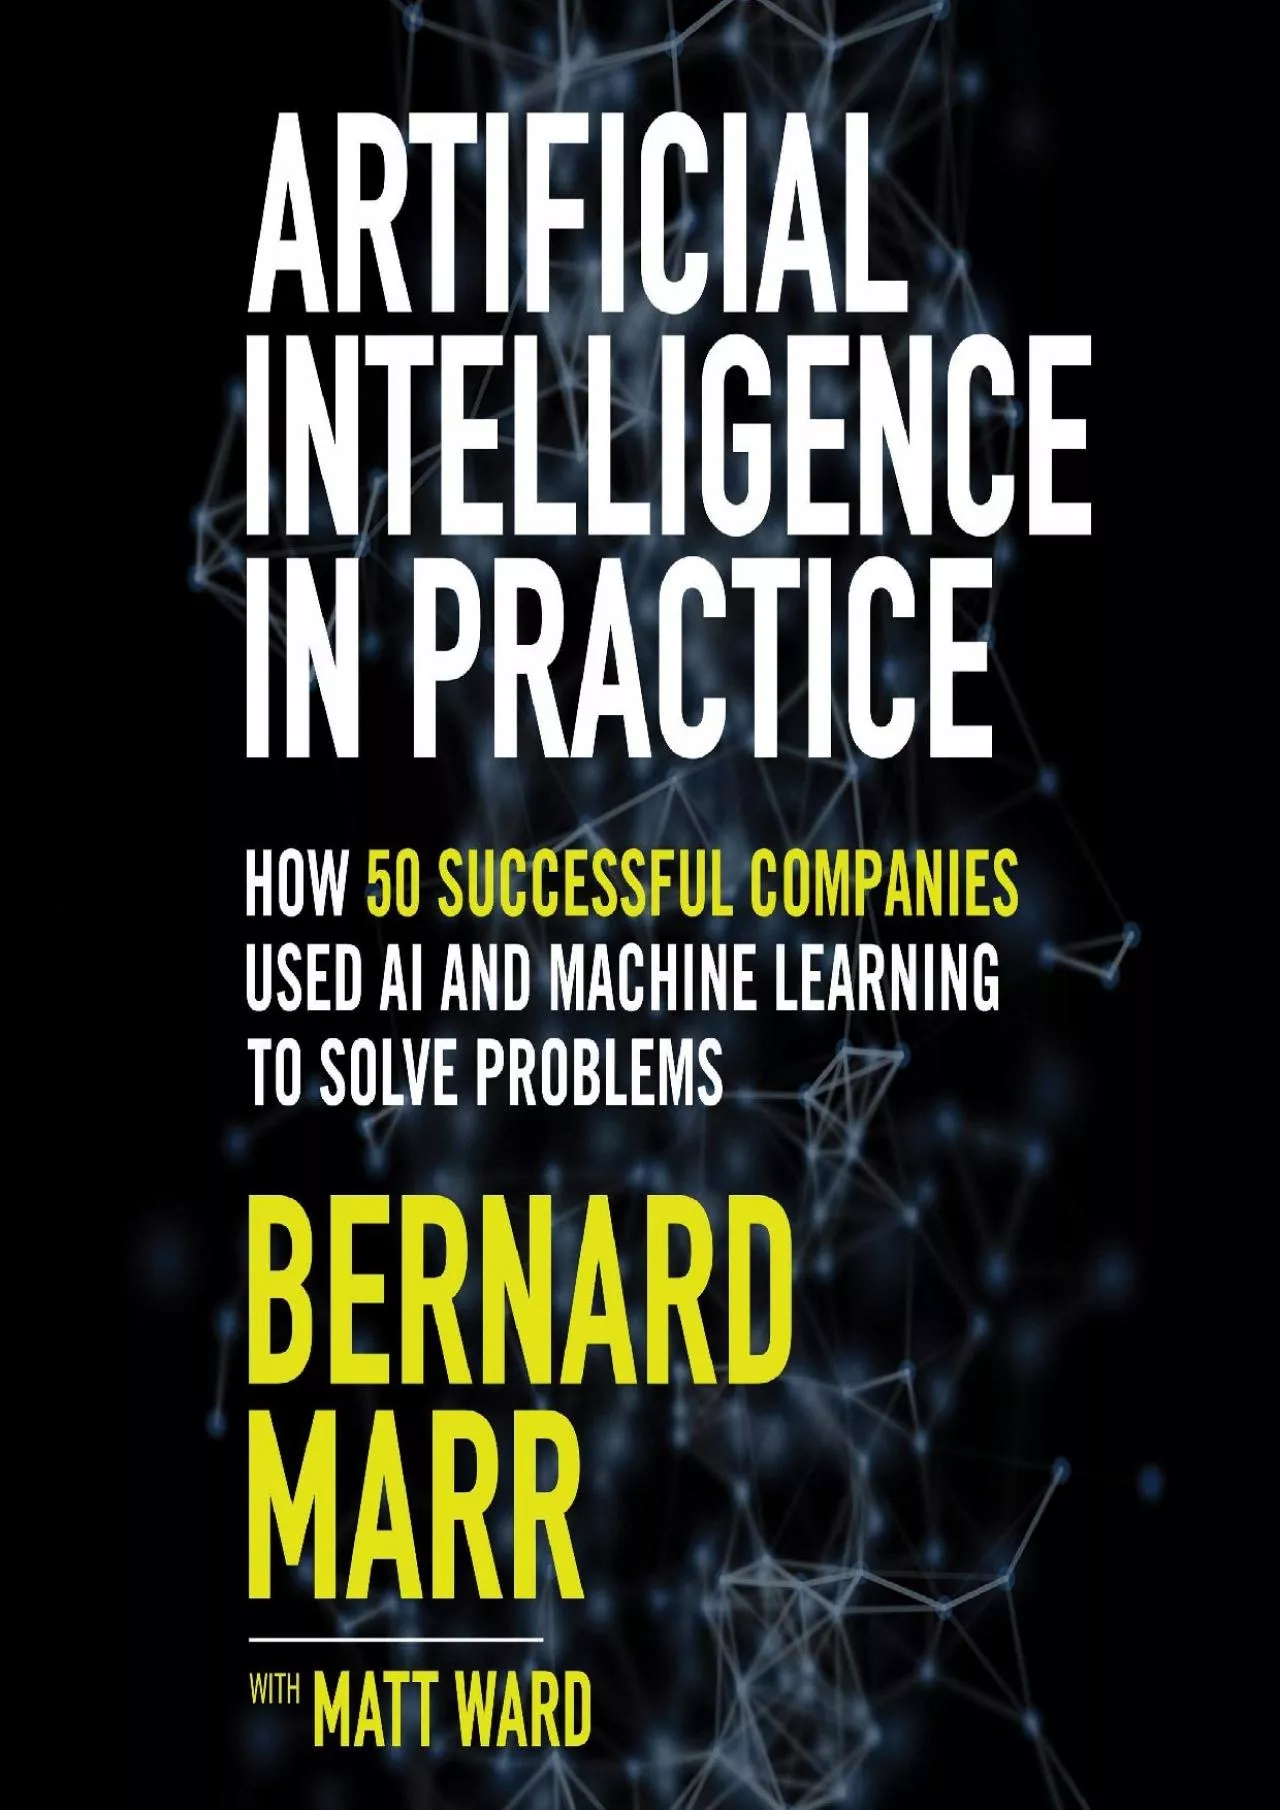 Artificial Intelligence in Practice: How 50 Successful Companies Used AI and Machine Learning